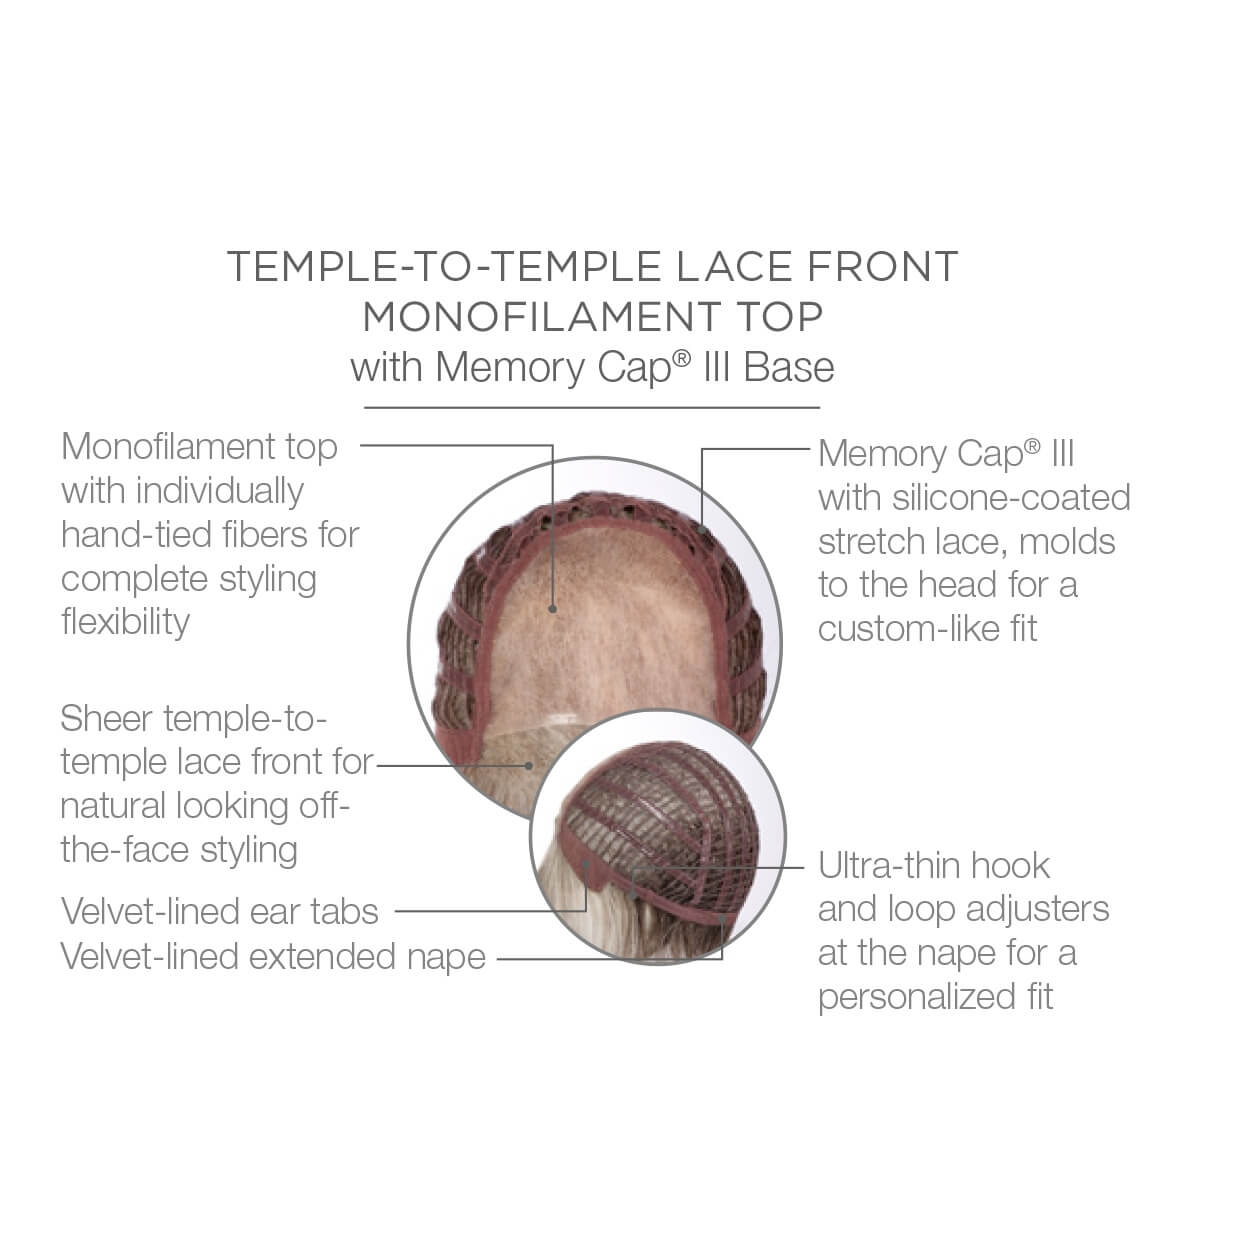 Temple to temple lace front monofilament top with Memory Cap III Base